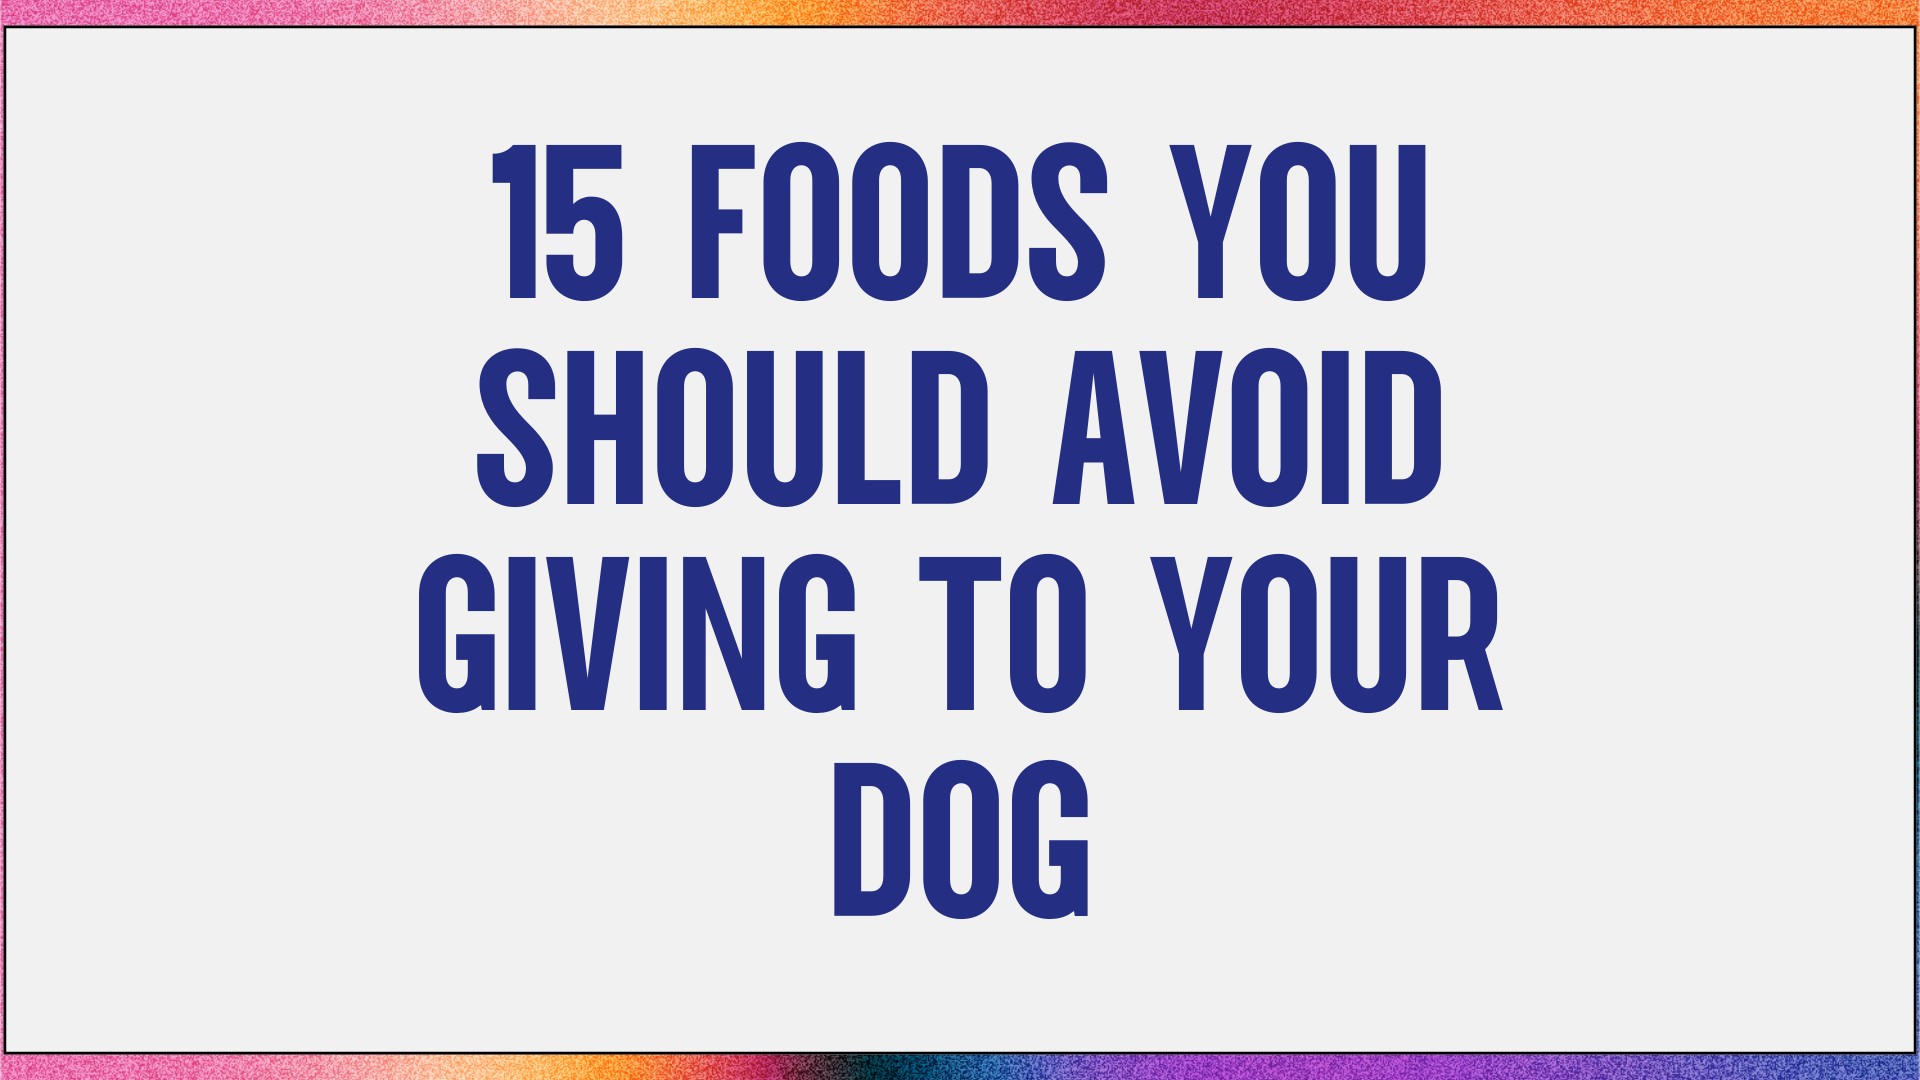 15 Foods You Should Avoid Giving To Your Dog